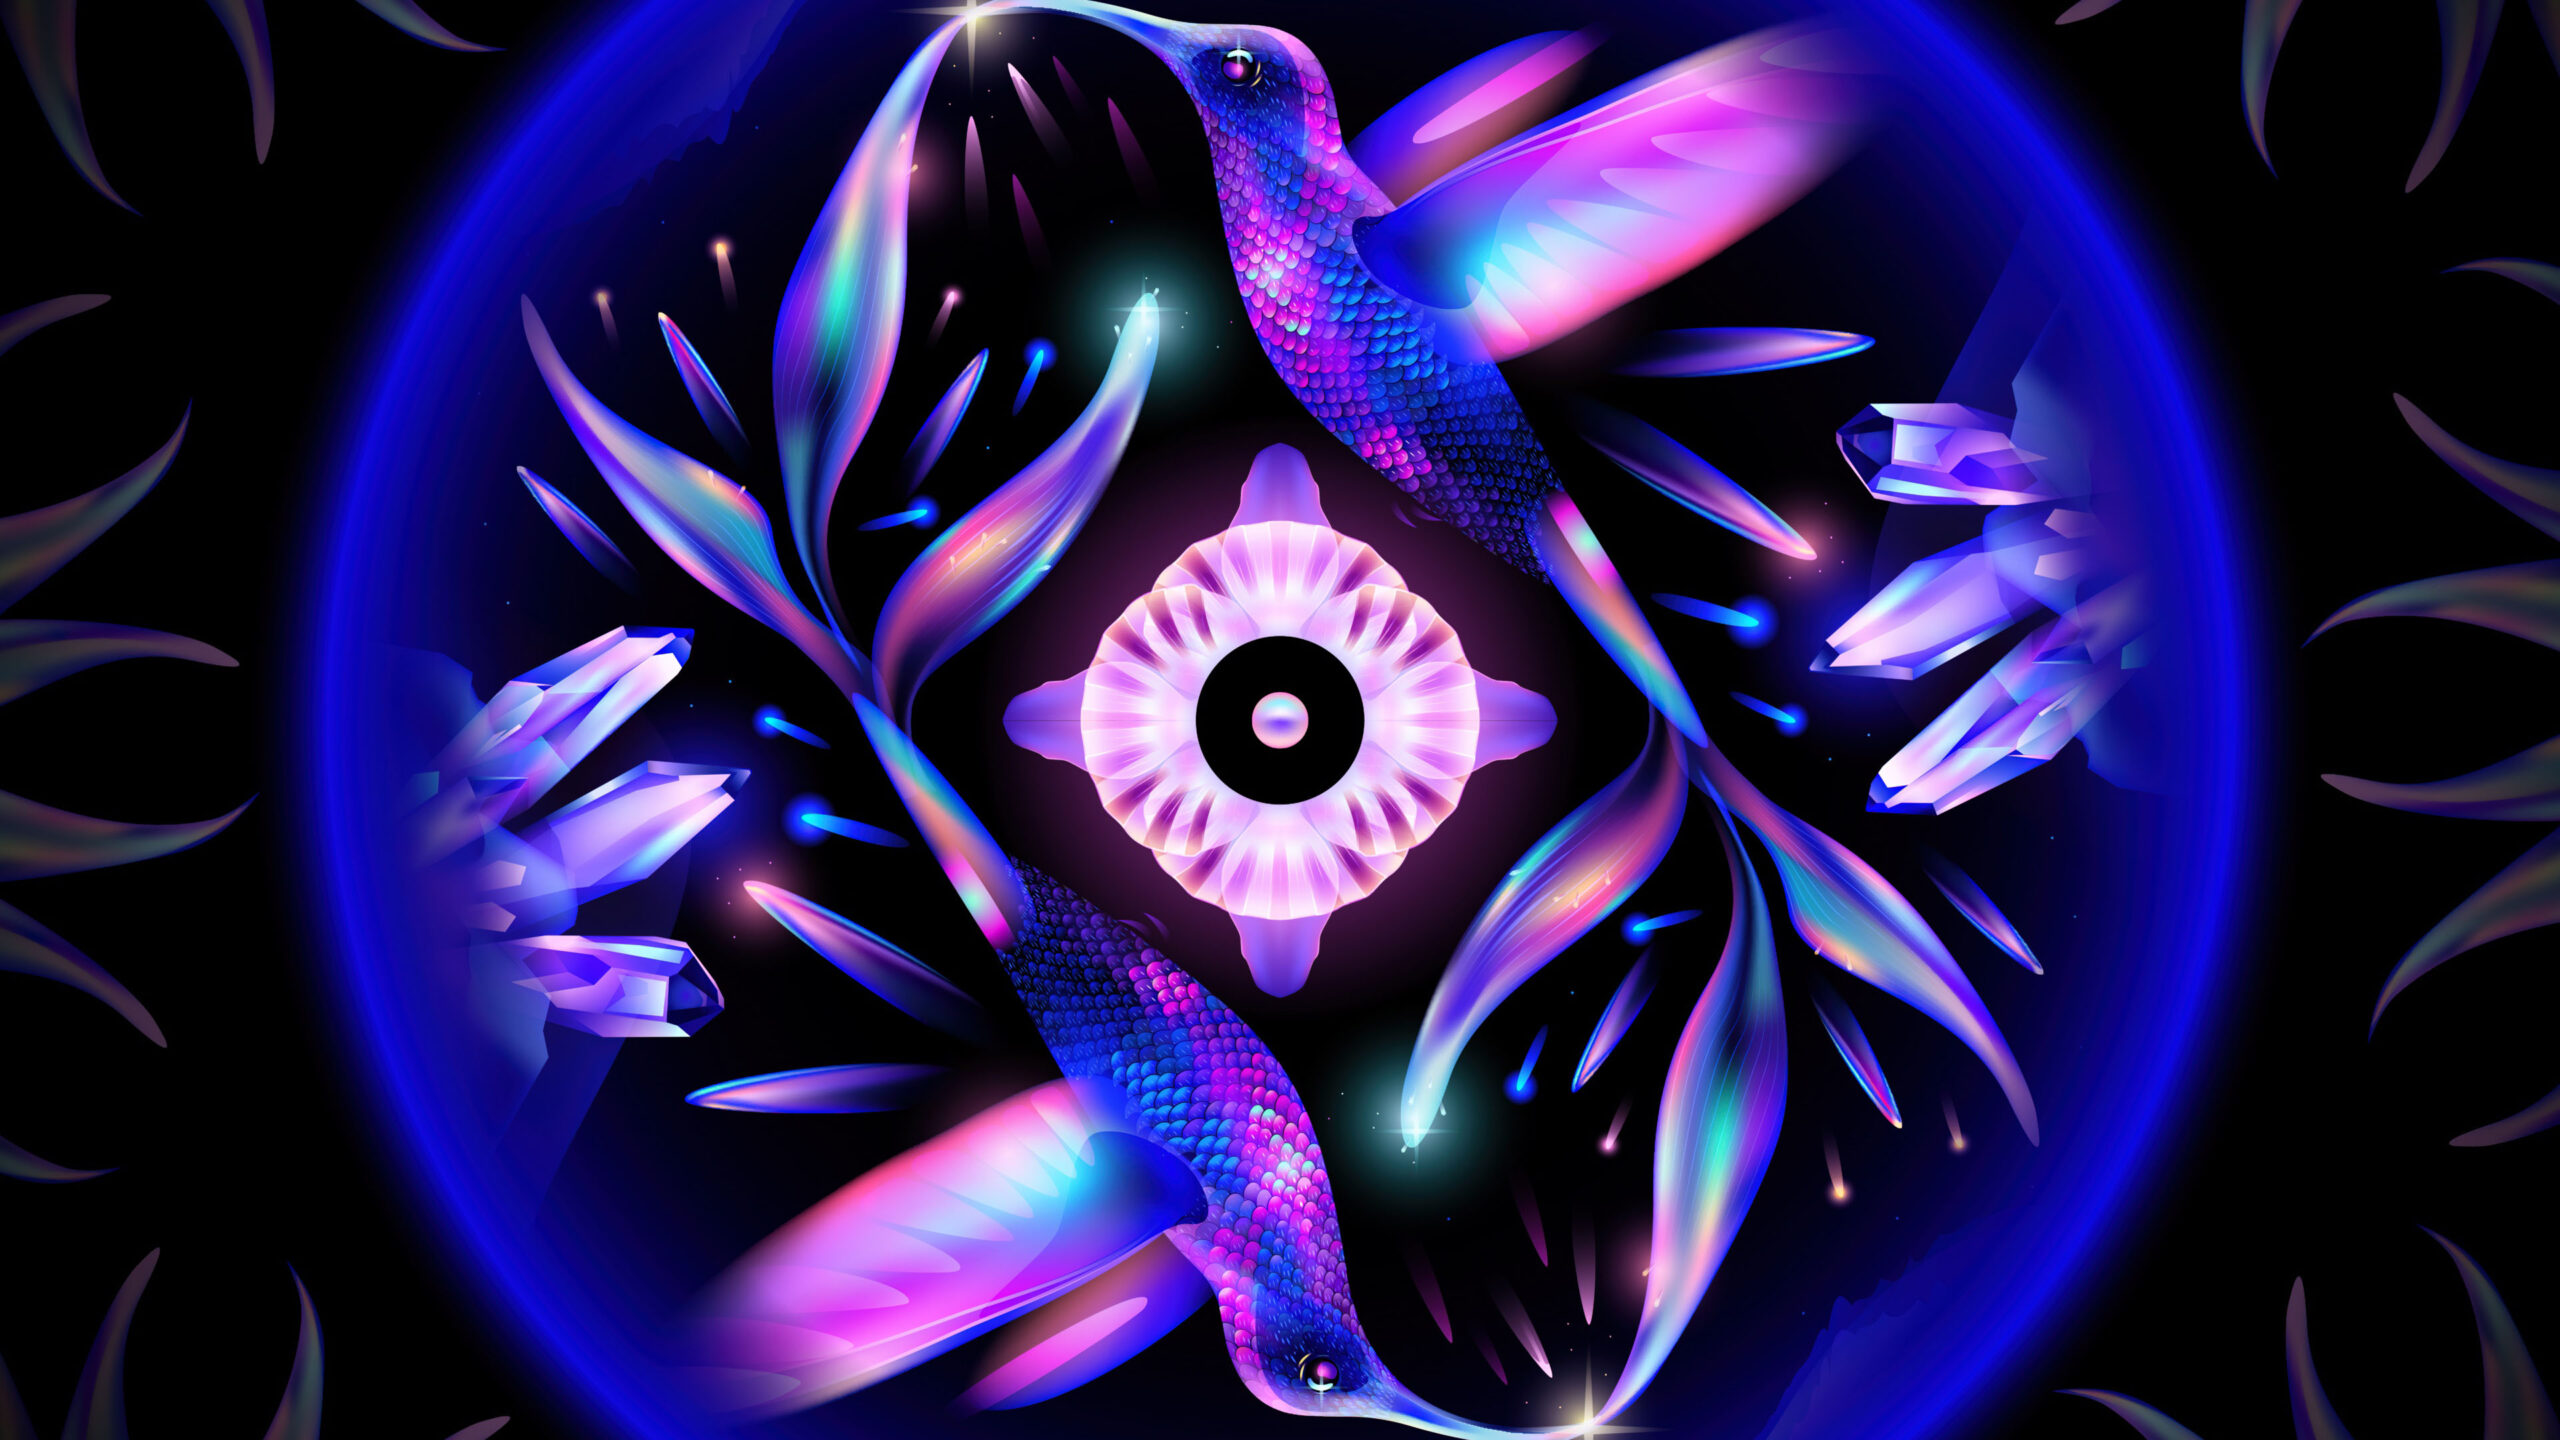 Parallel Symmetry Glowing Girly Wallpaper Abstraction K 2K Abstract